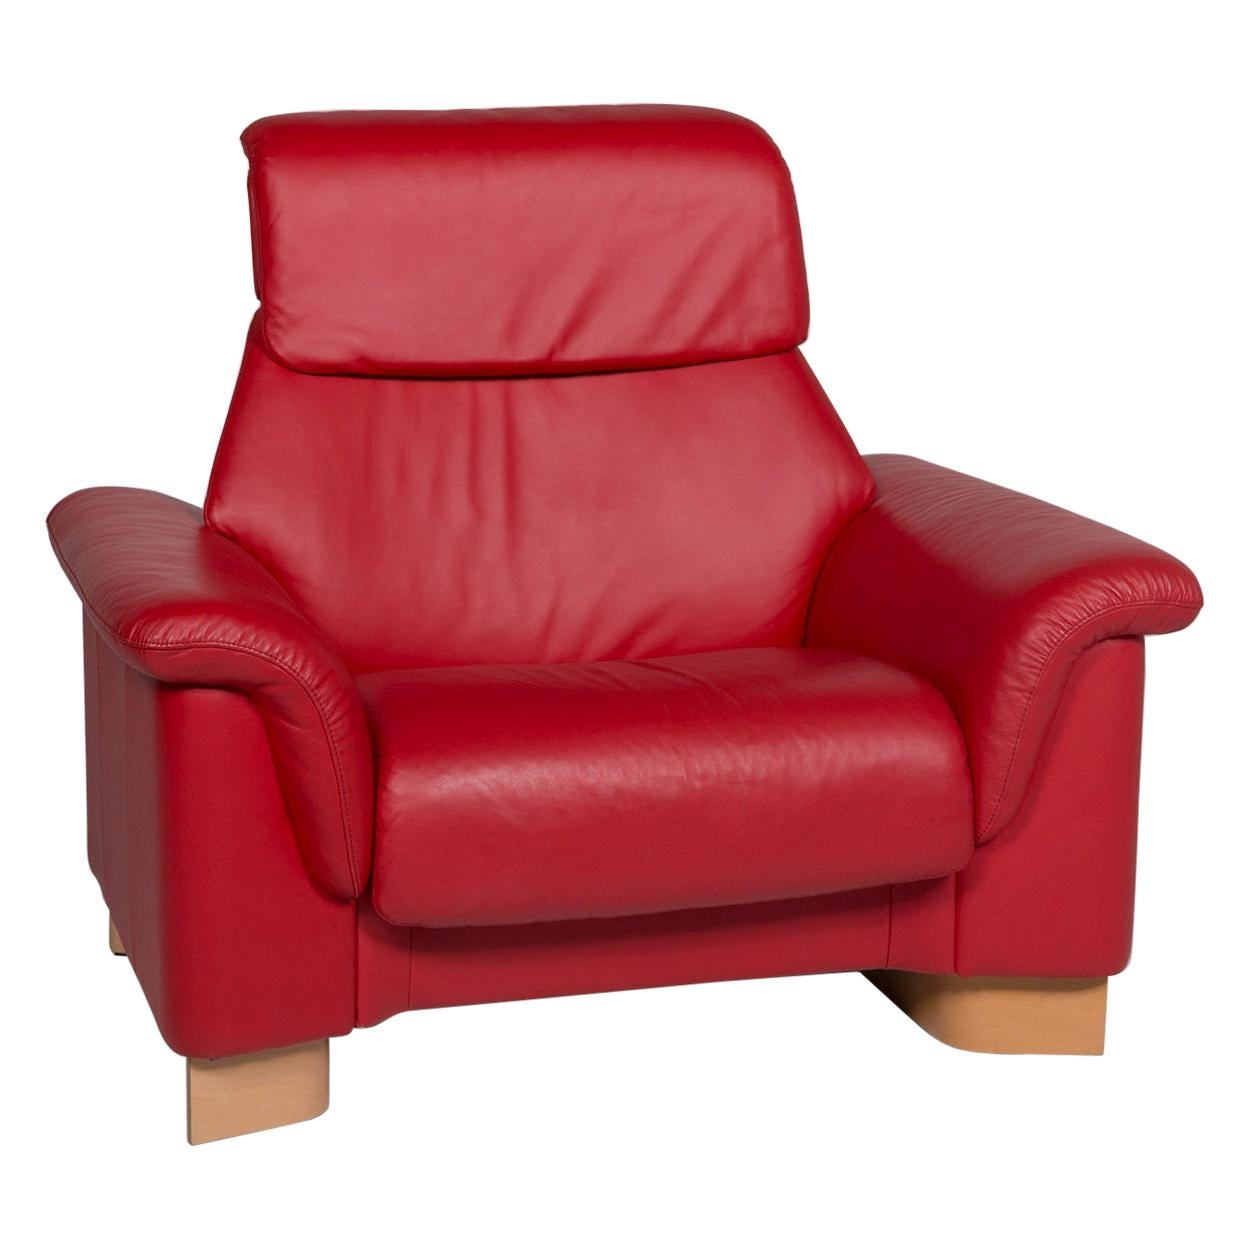 Stressless Leather Armchair Red For Sale